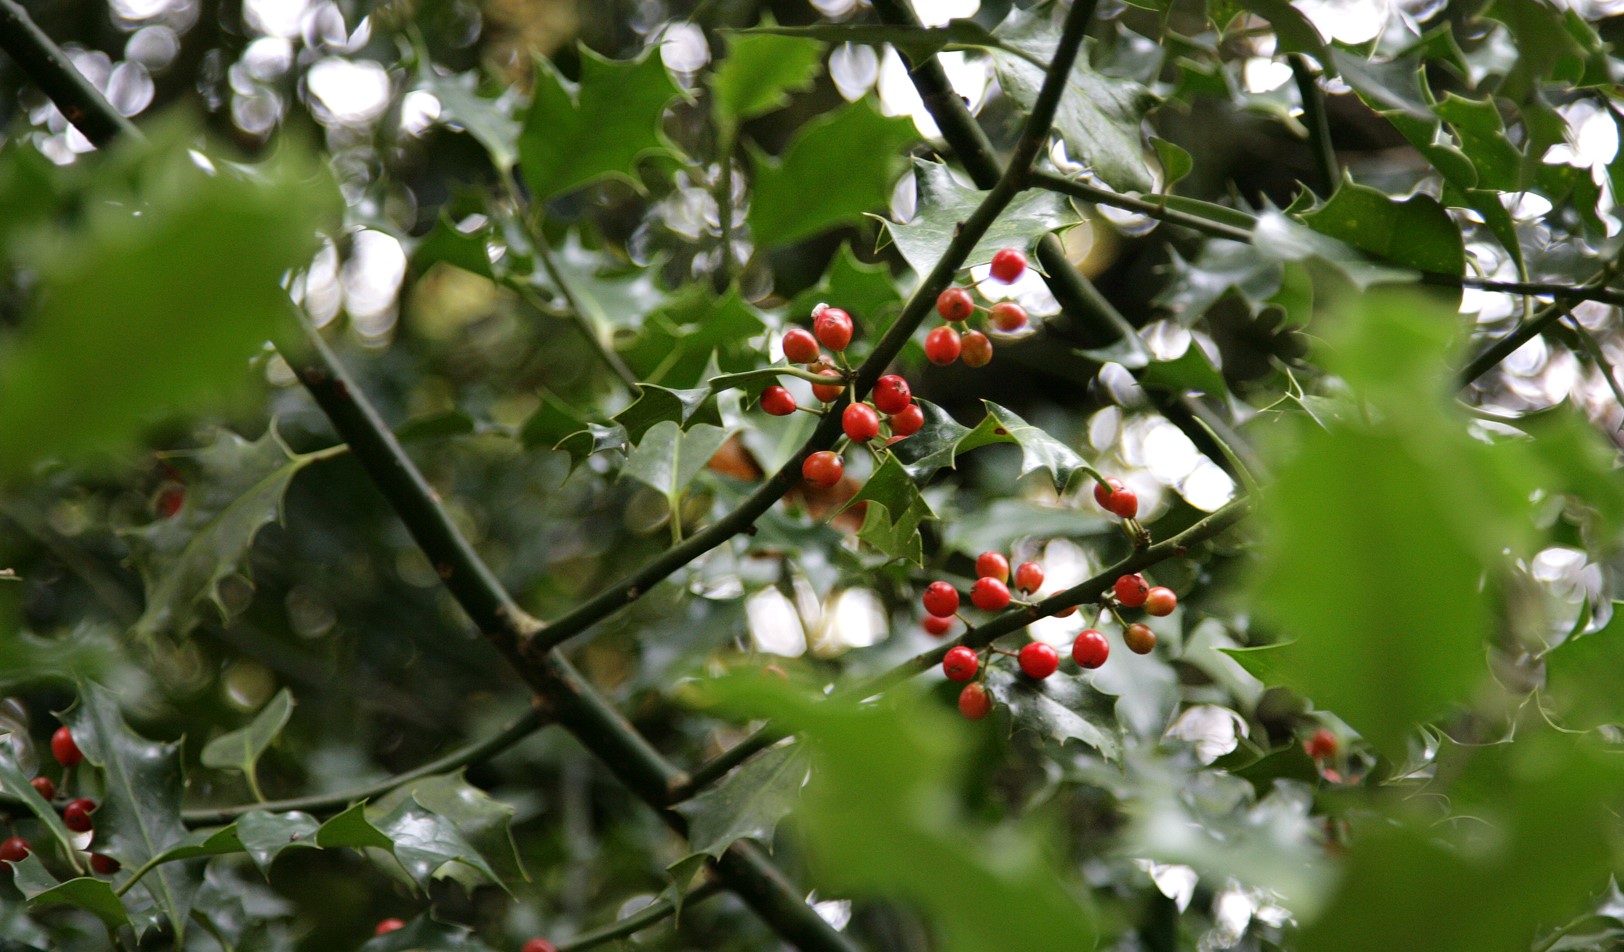 Close up of red berries on holly bush